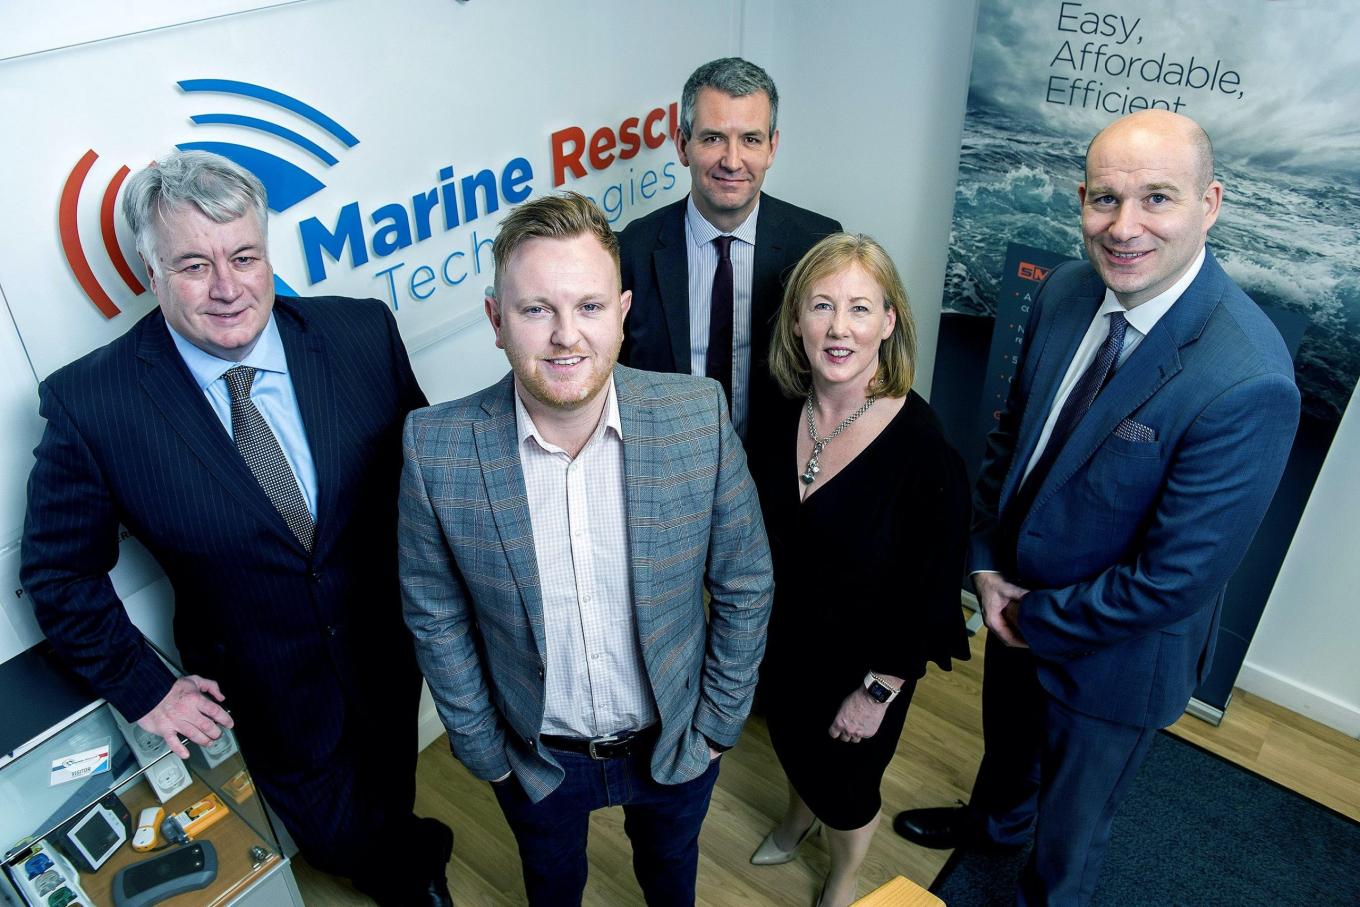 4 men and a woman stood in an office with Marine Rescue Technologies sign in the background